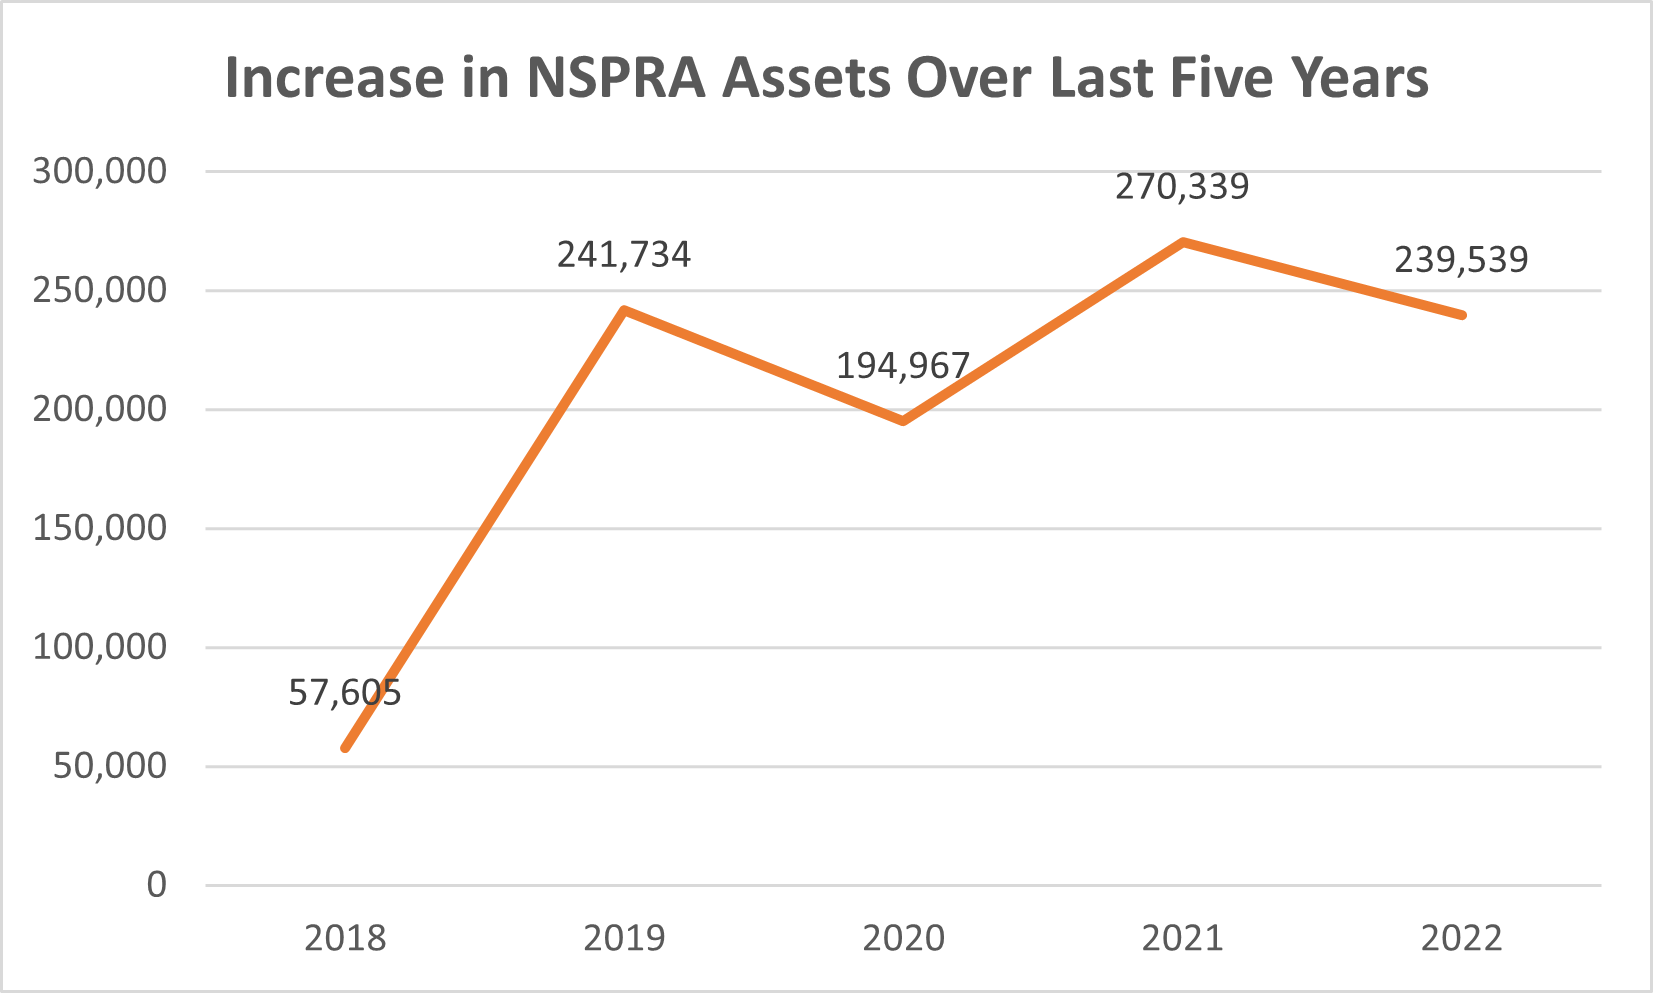 Chart reflecting increase in NSPRA assets over the last five years.